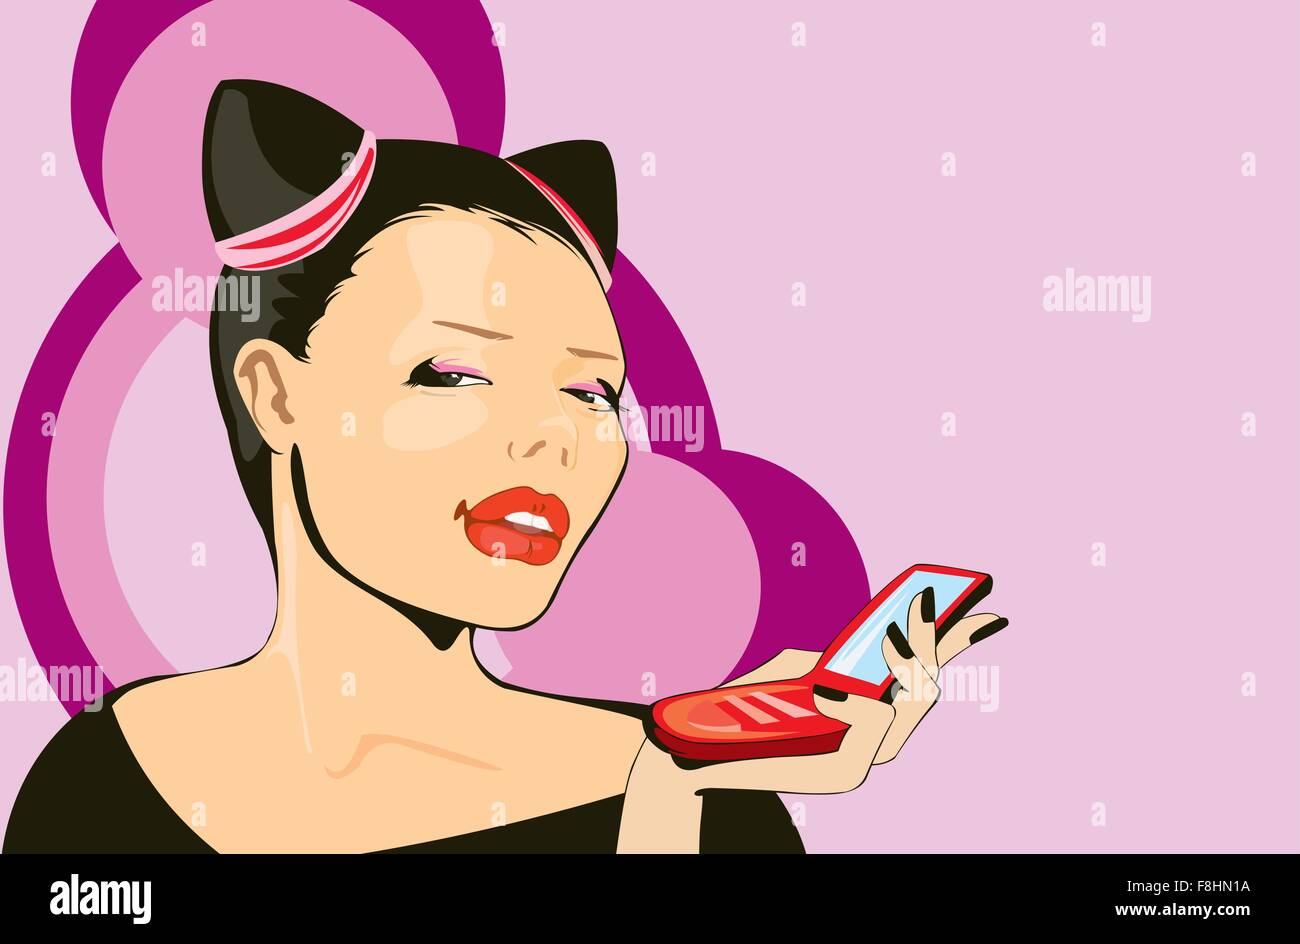 vector image of woman with red cell phone Stock Vector